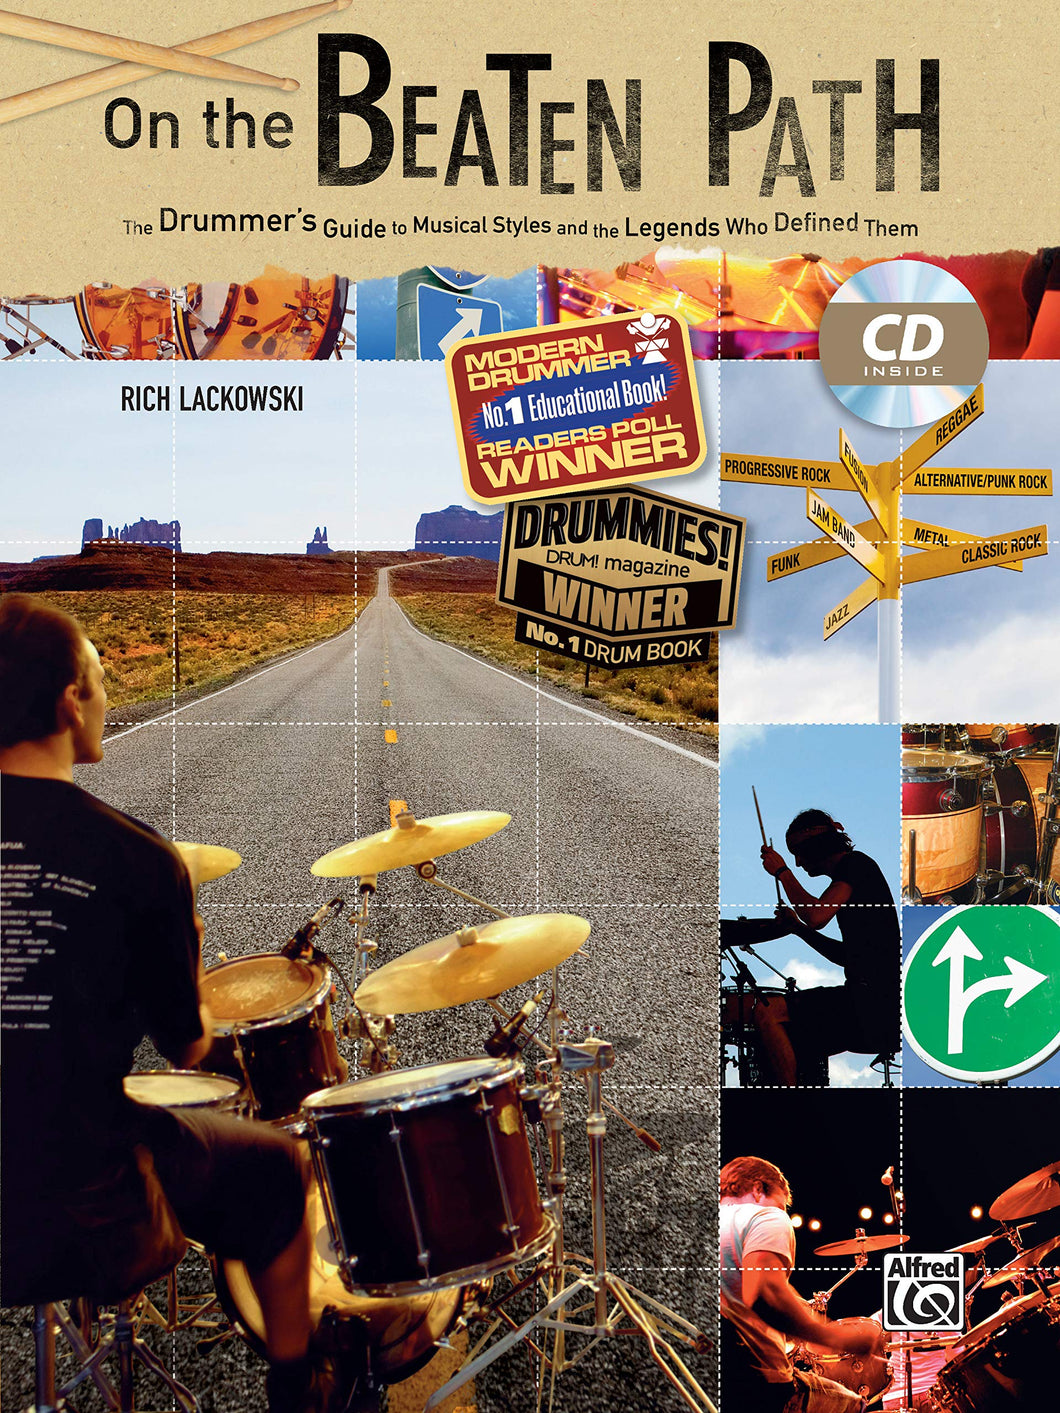 Tom Sawyer - Rush - Collection of Drum Transcriptions / Drum Sheet Music - Alfred Music OBPDGMS